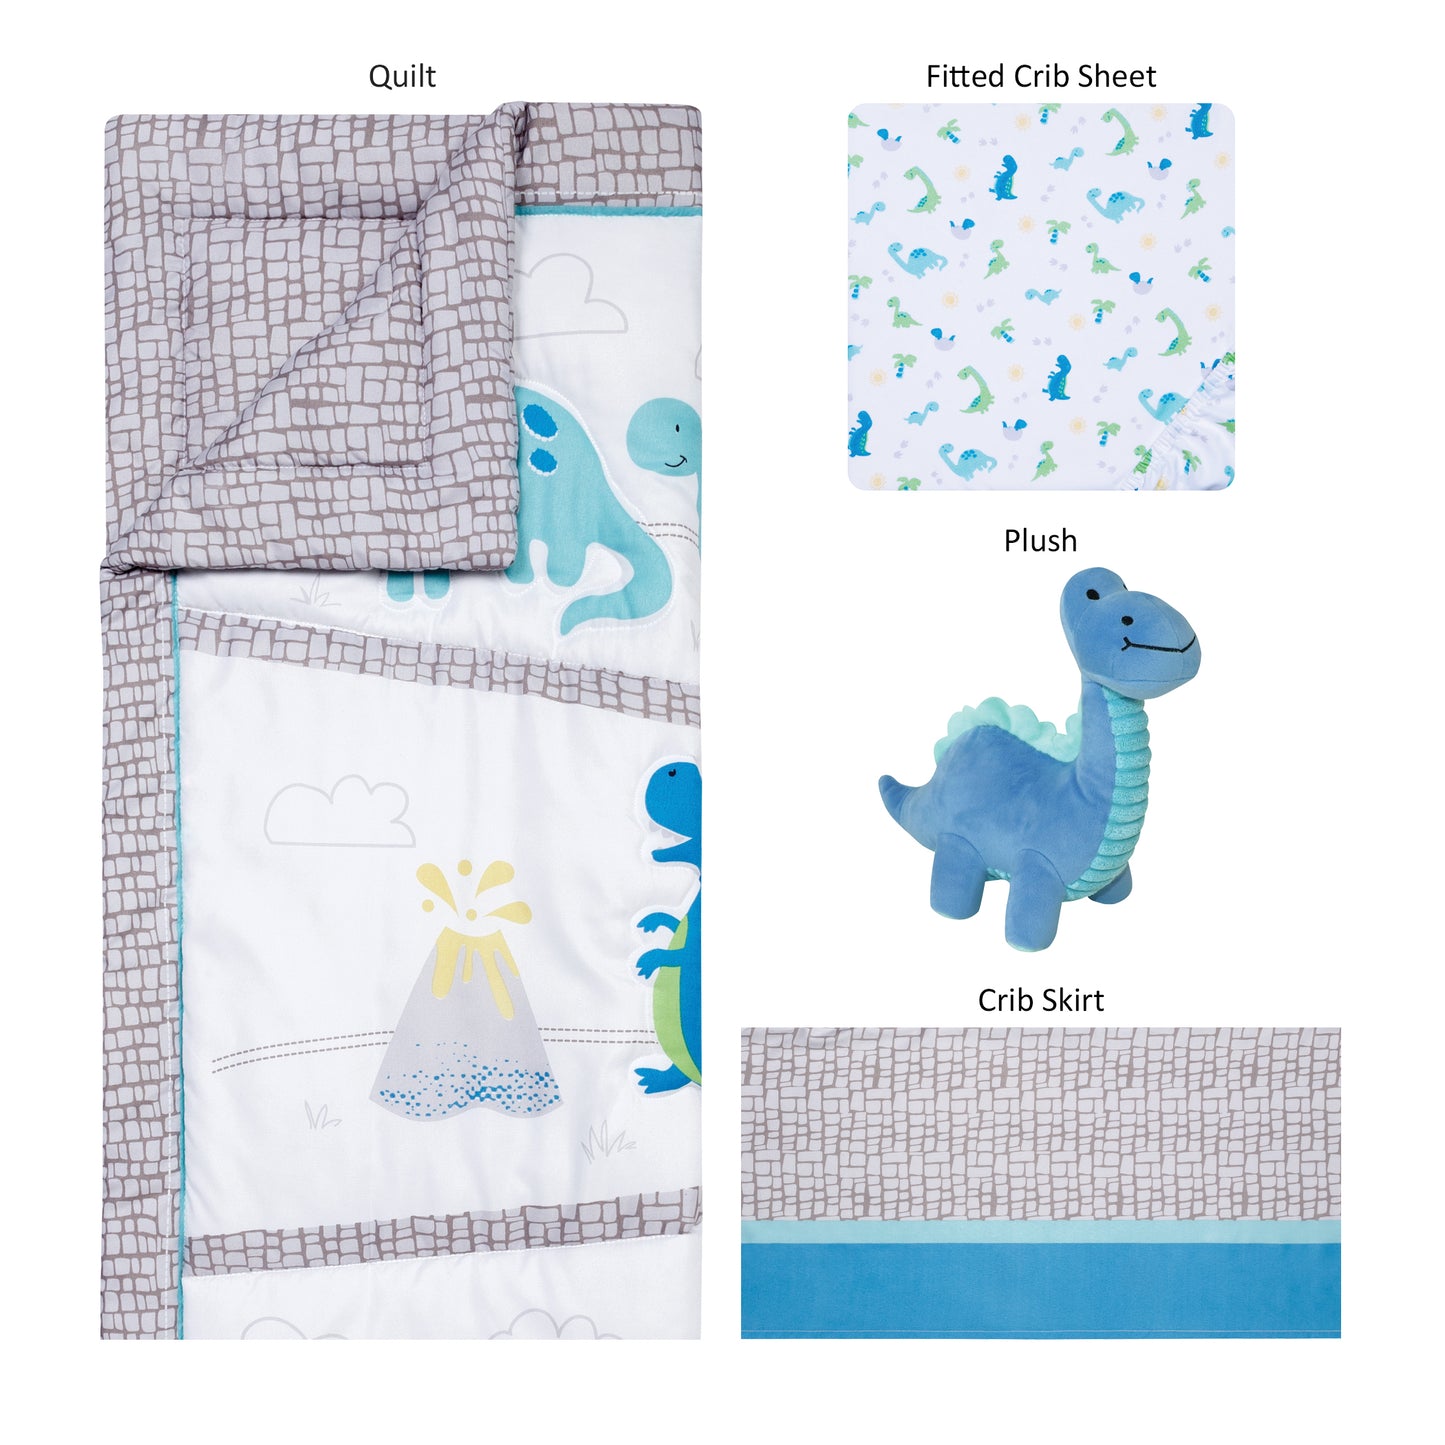  Sammy and Lou Dinosaur Pals 4 Piece Crib Bedding; pieces laid out includes nursery quilt, crib sheet, crib quilt, plush toy